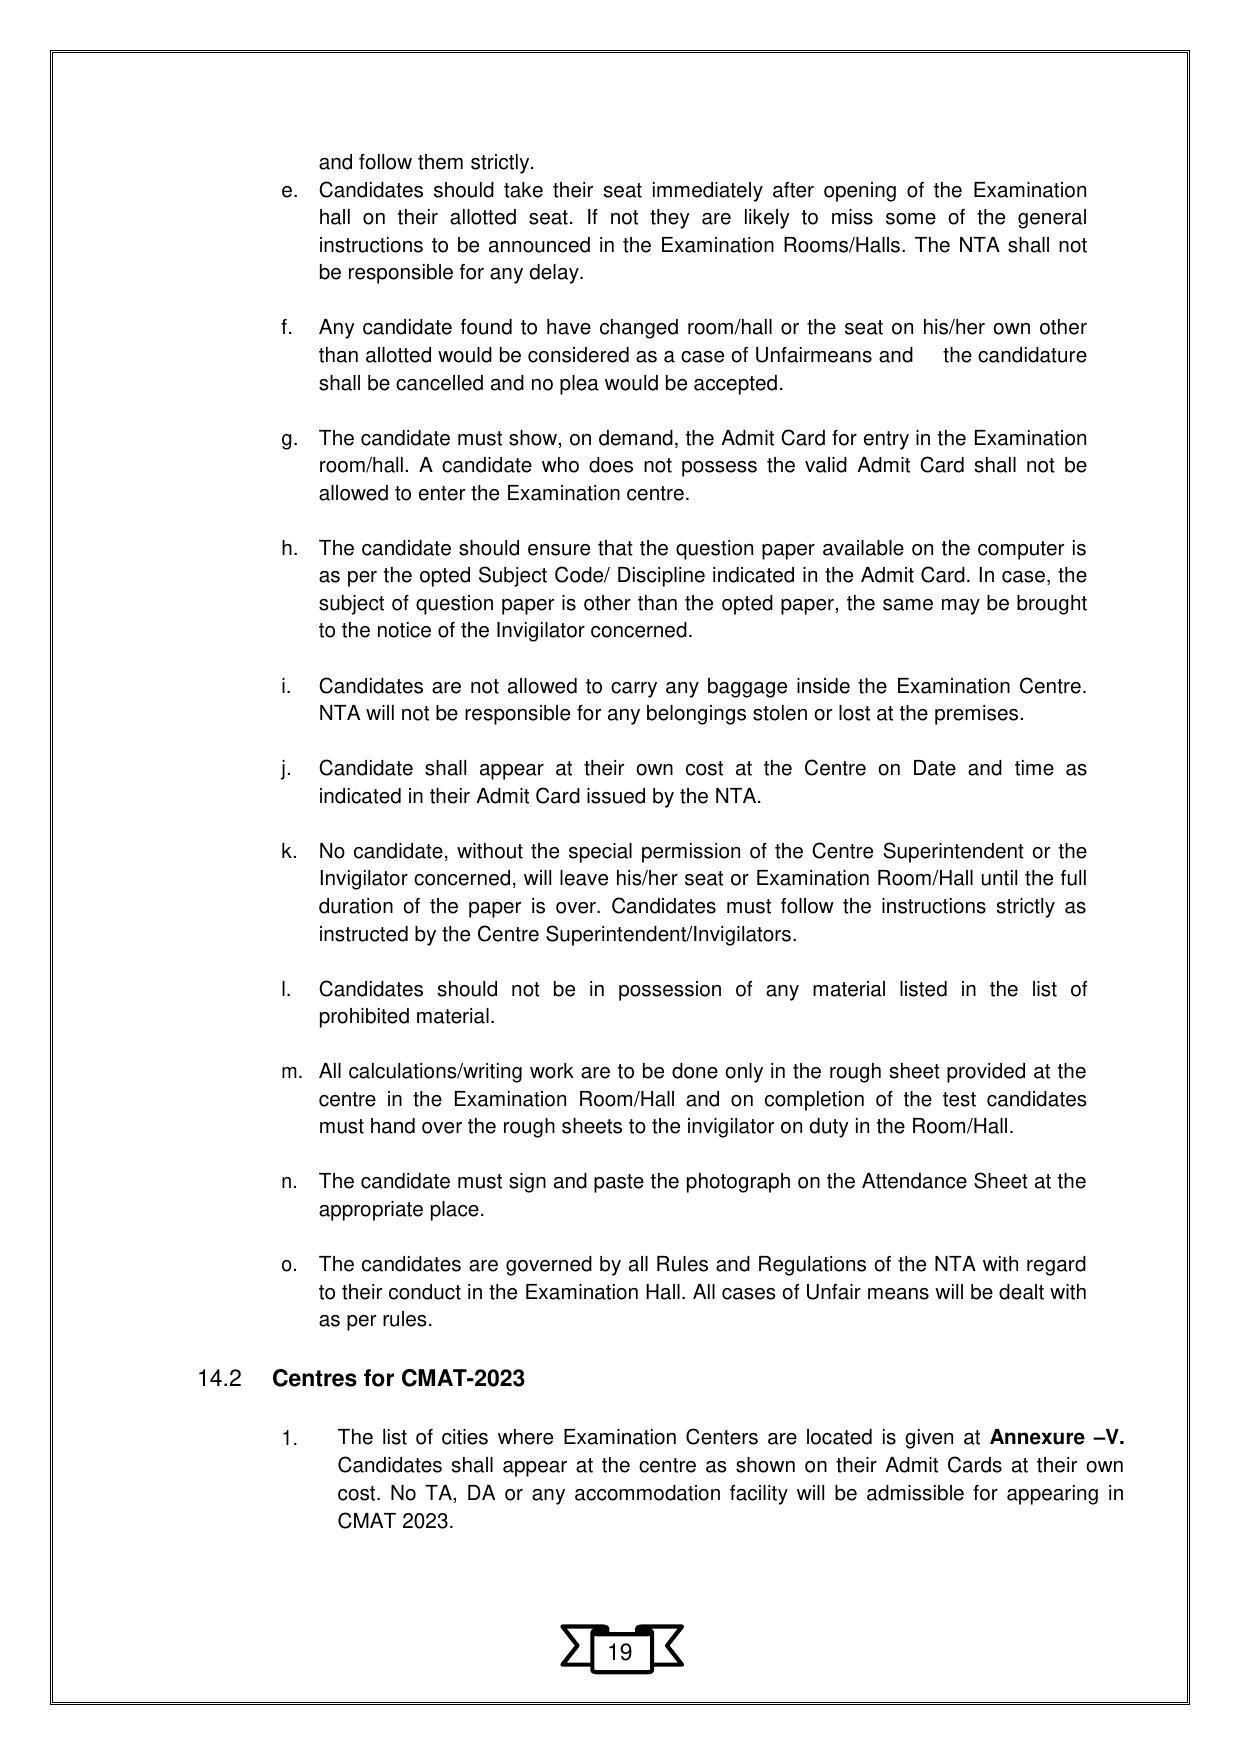 CMAT 2023 Information Bulletin - Page 22